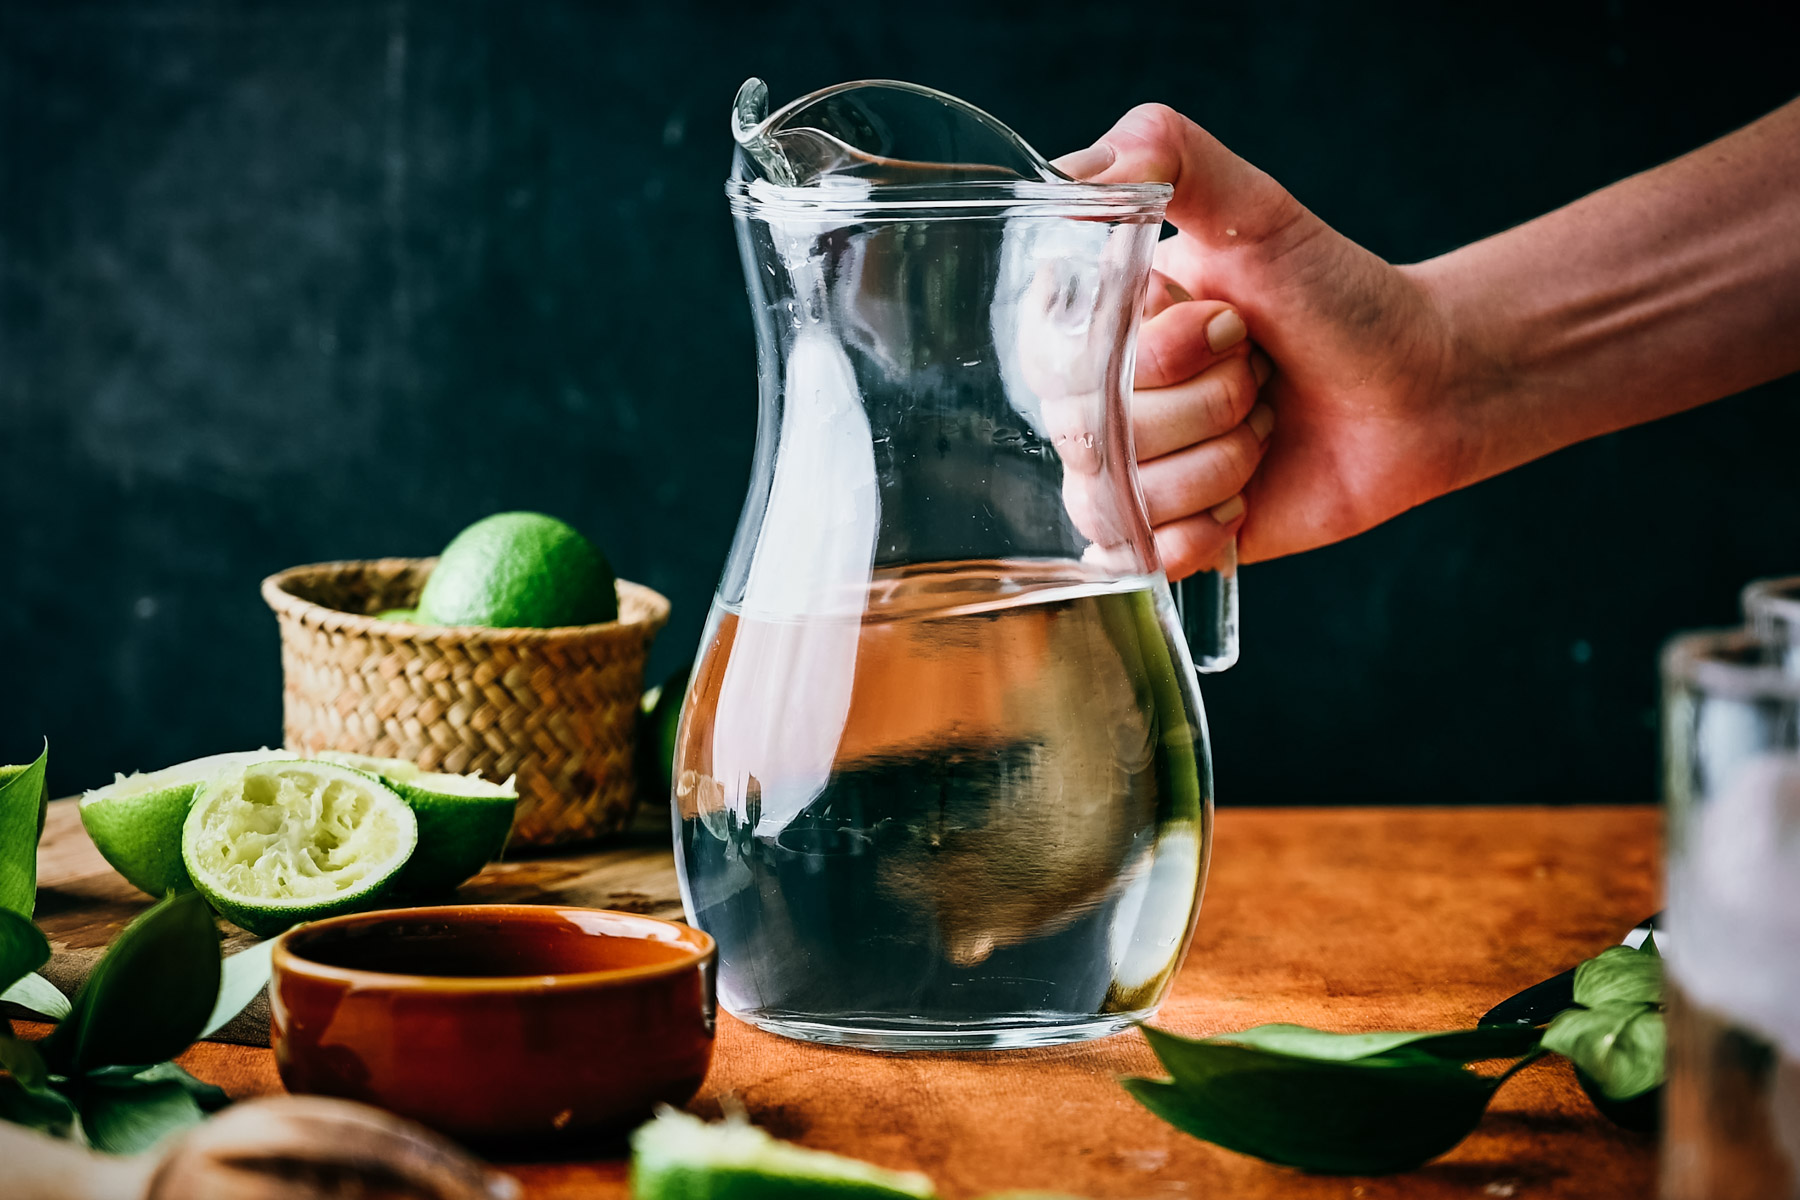 A person's hand holding a clear glass pitcher of water on a wooden table, surrounded by halved limes and a bowl of salt.